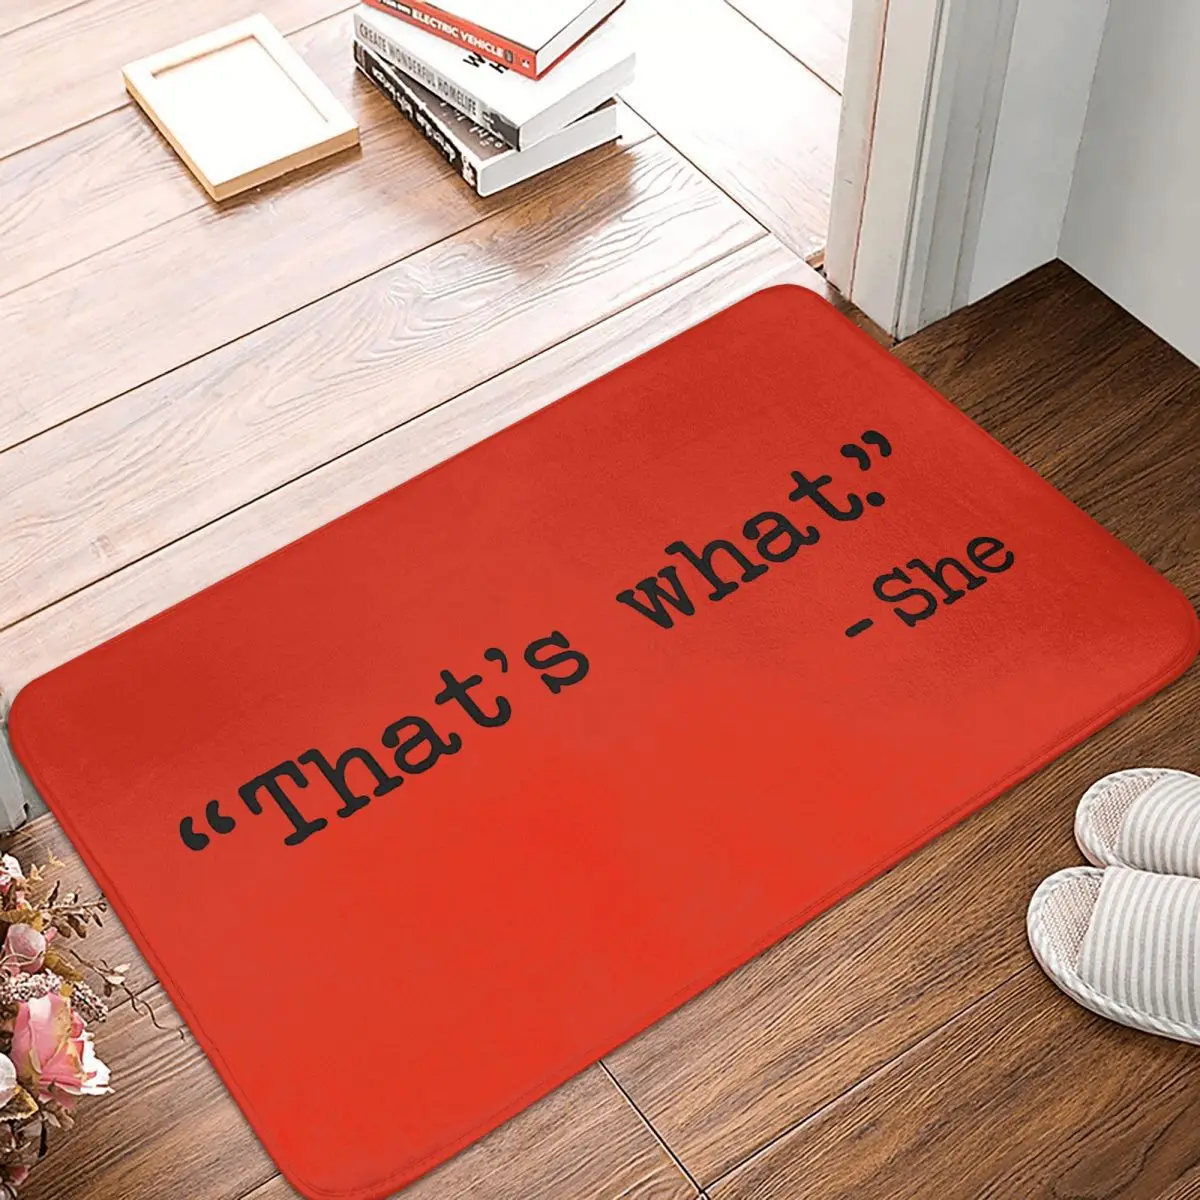 

The Office Michael Scott Bedroom Mat That's What She Said Quote Doormat Living Room Carpet Entrance Door Rug Home Decoration